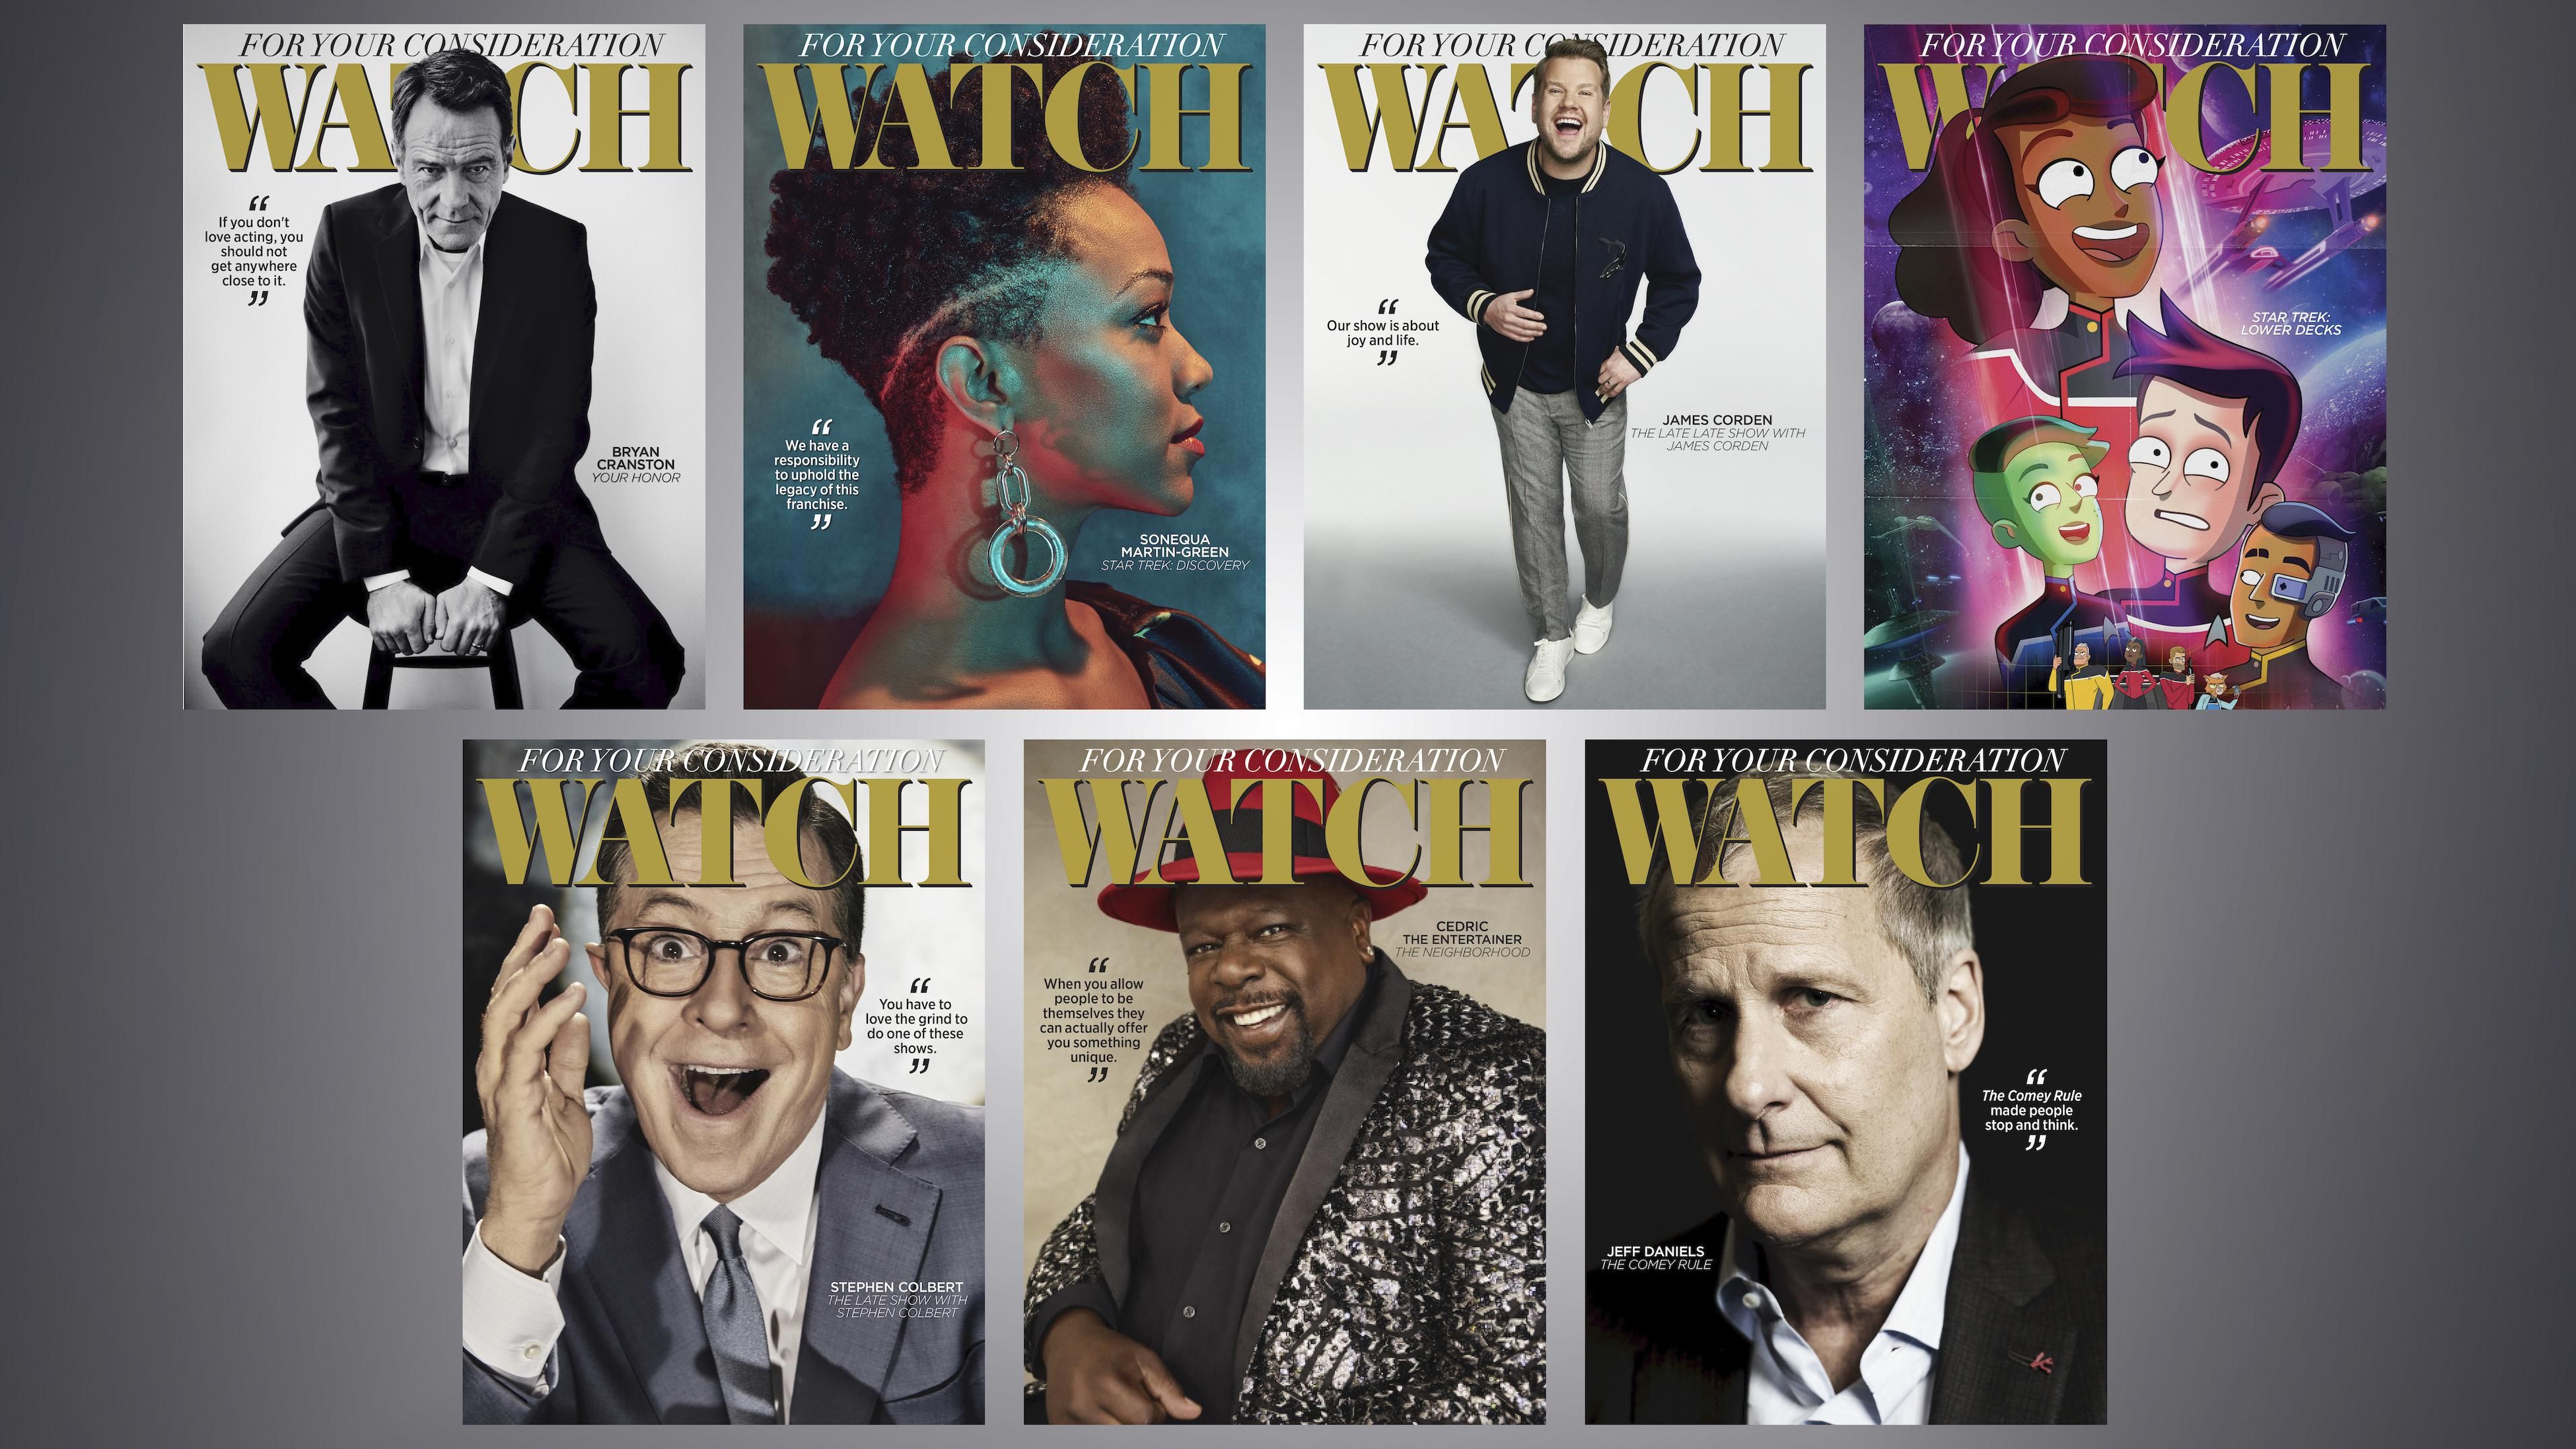 Seven different magazine covers used for the For Your Consideration issue of Watch